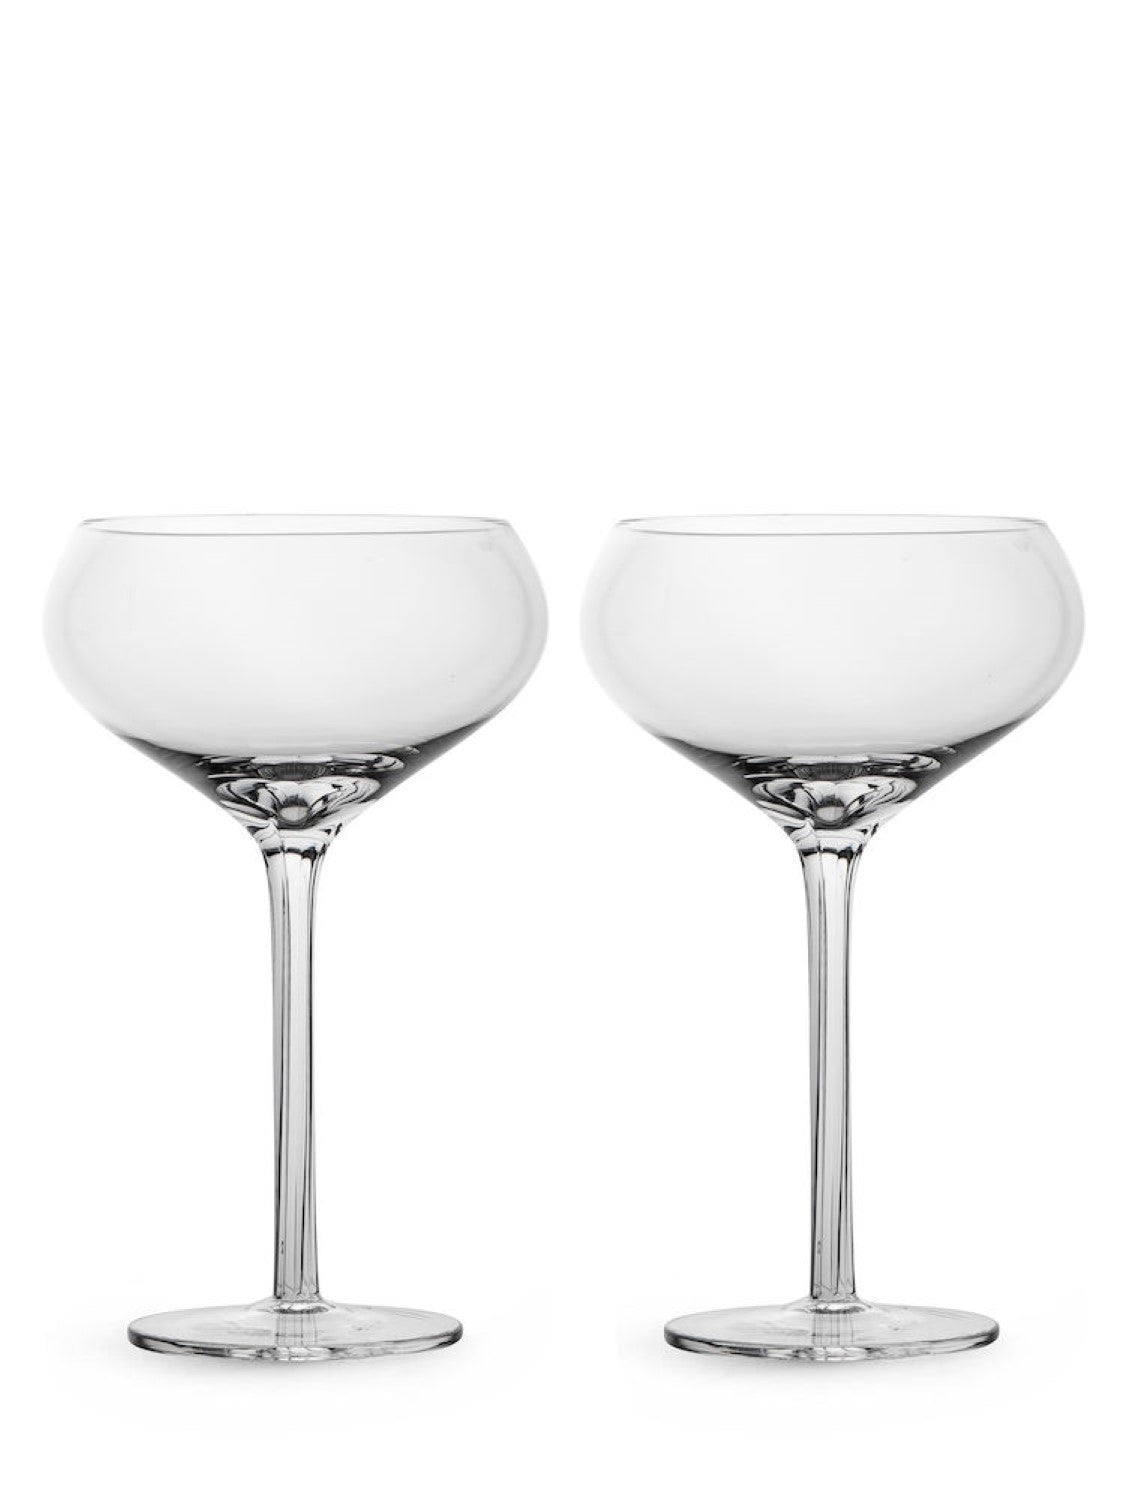 Curved Square Bottom Glasses-Set of 2 - 501 Faire